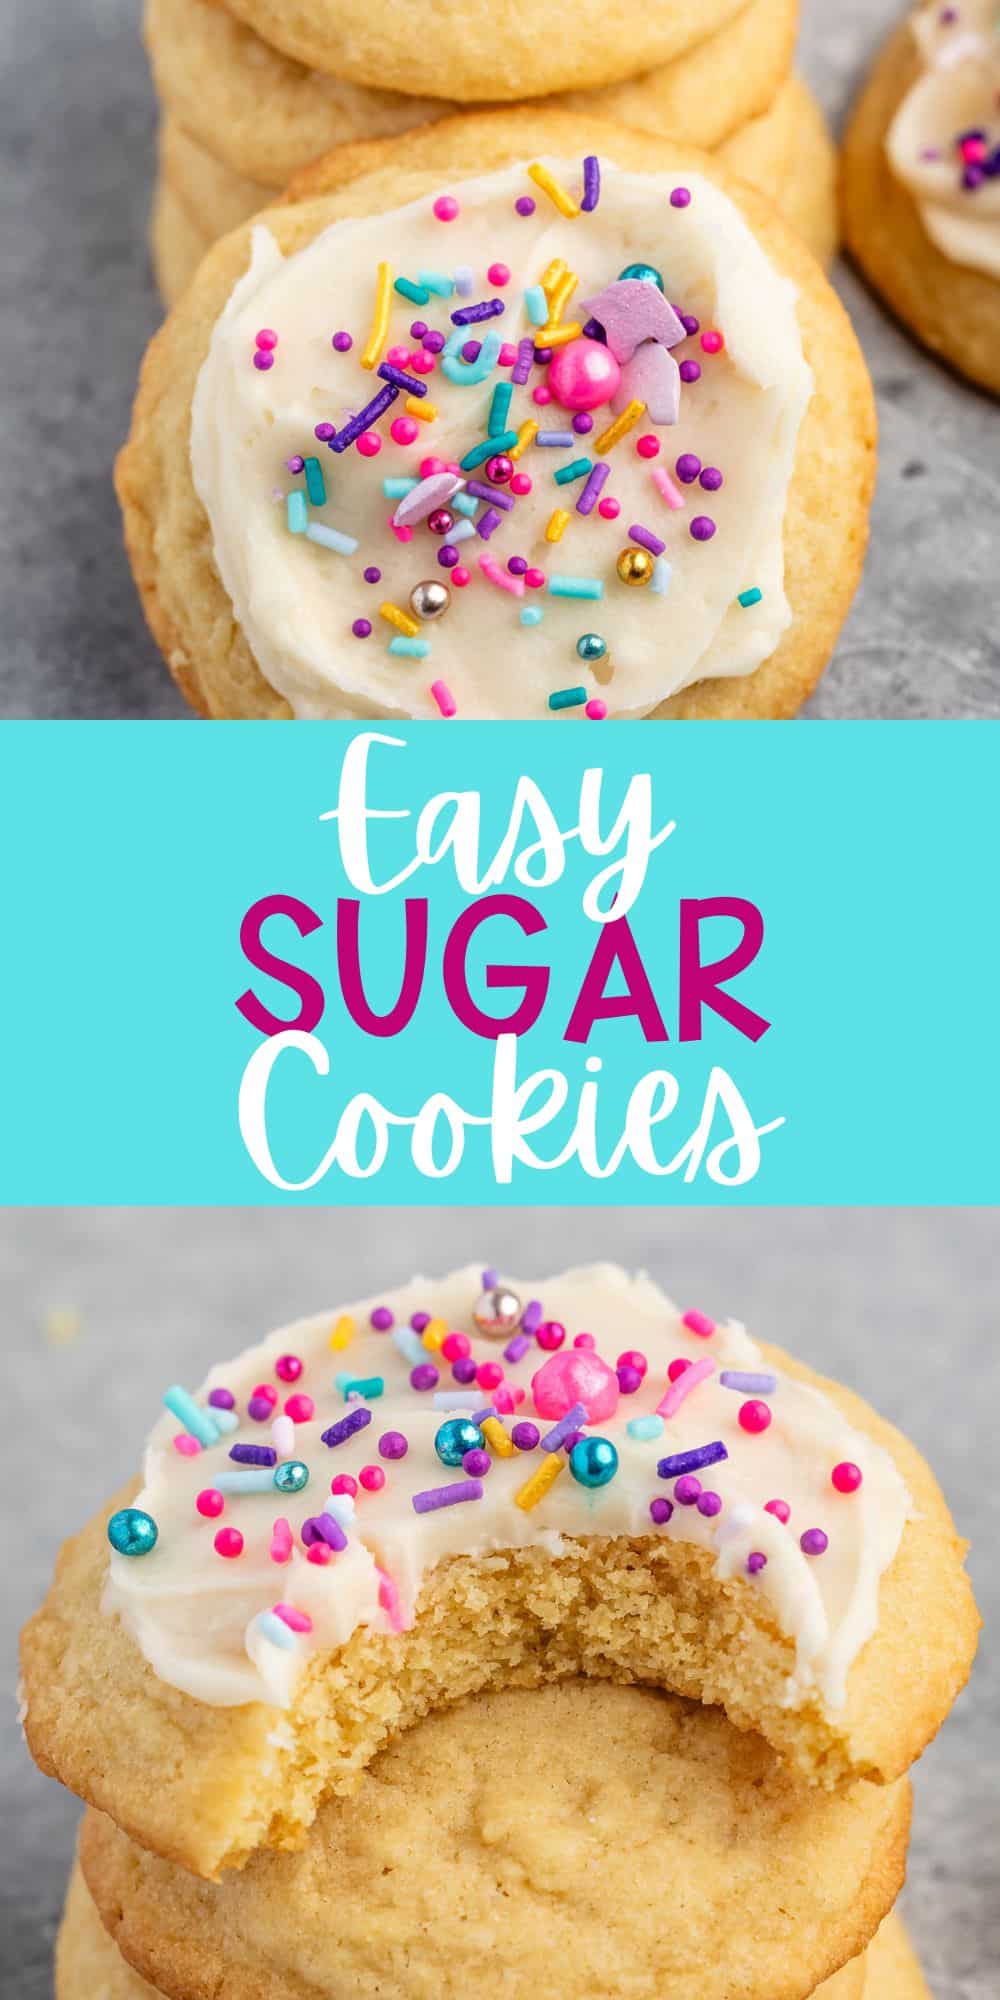 two photos of sugar cookie with white frosting and pink and blue sprinkles with words on the image.